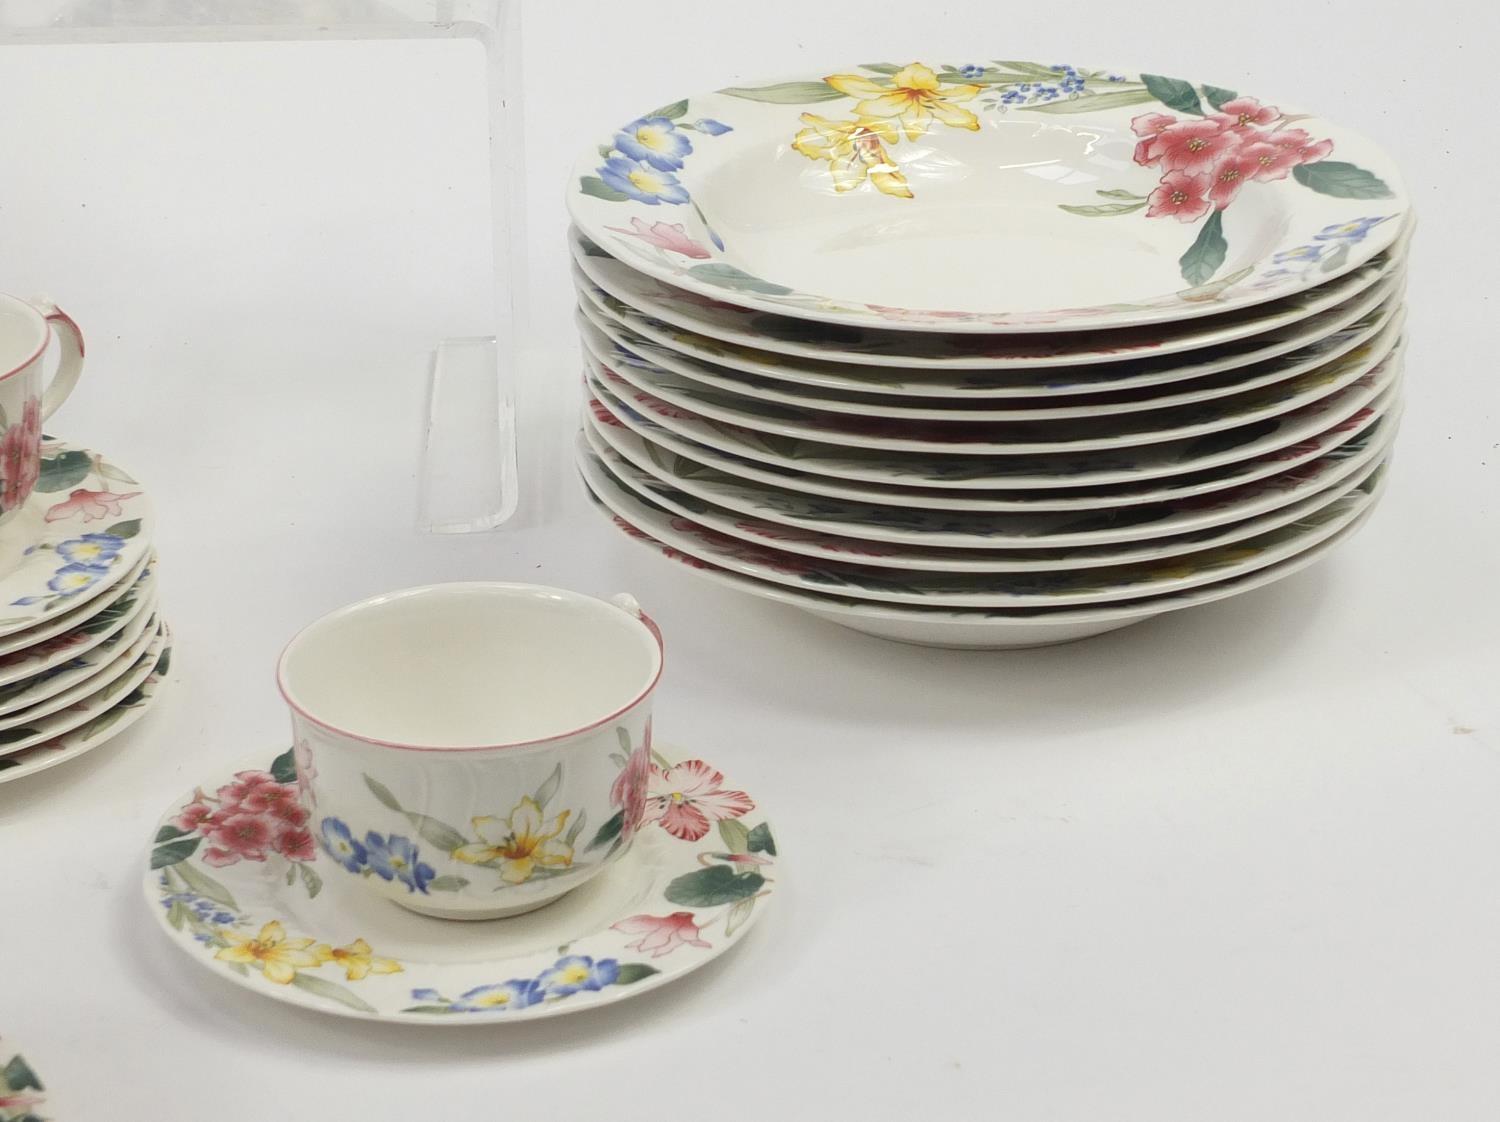 Villeroy & Boch Flora Bella dinner and teaware including plates and cups with saucers - Image 5 of 9